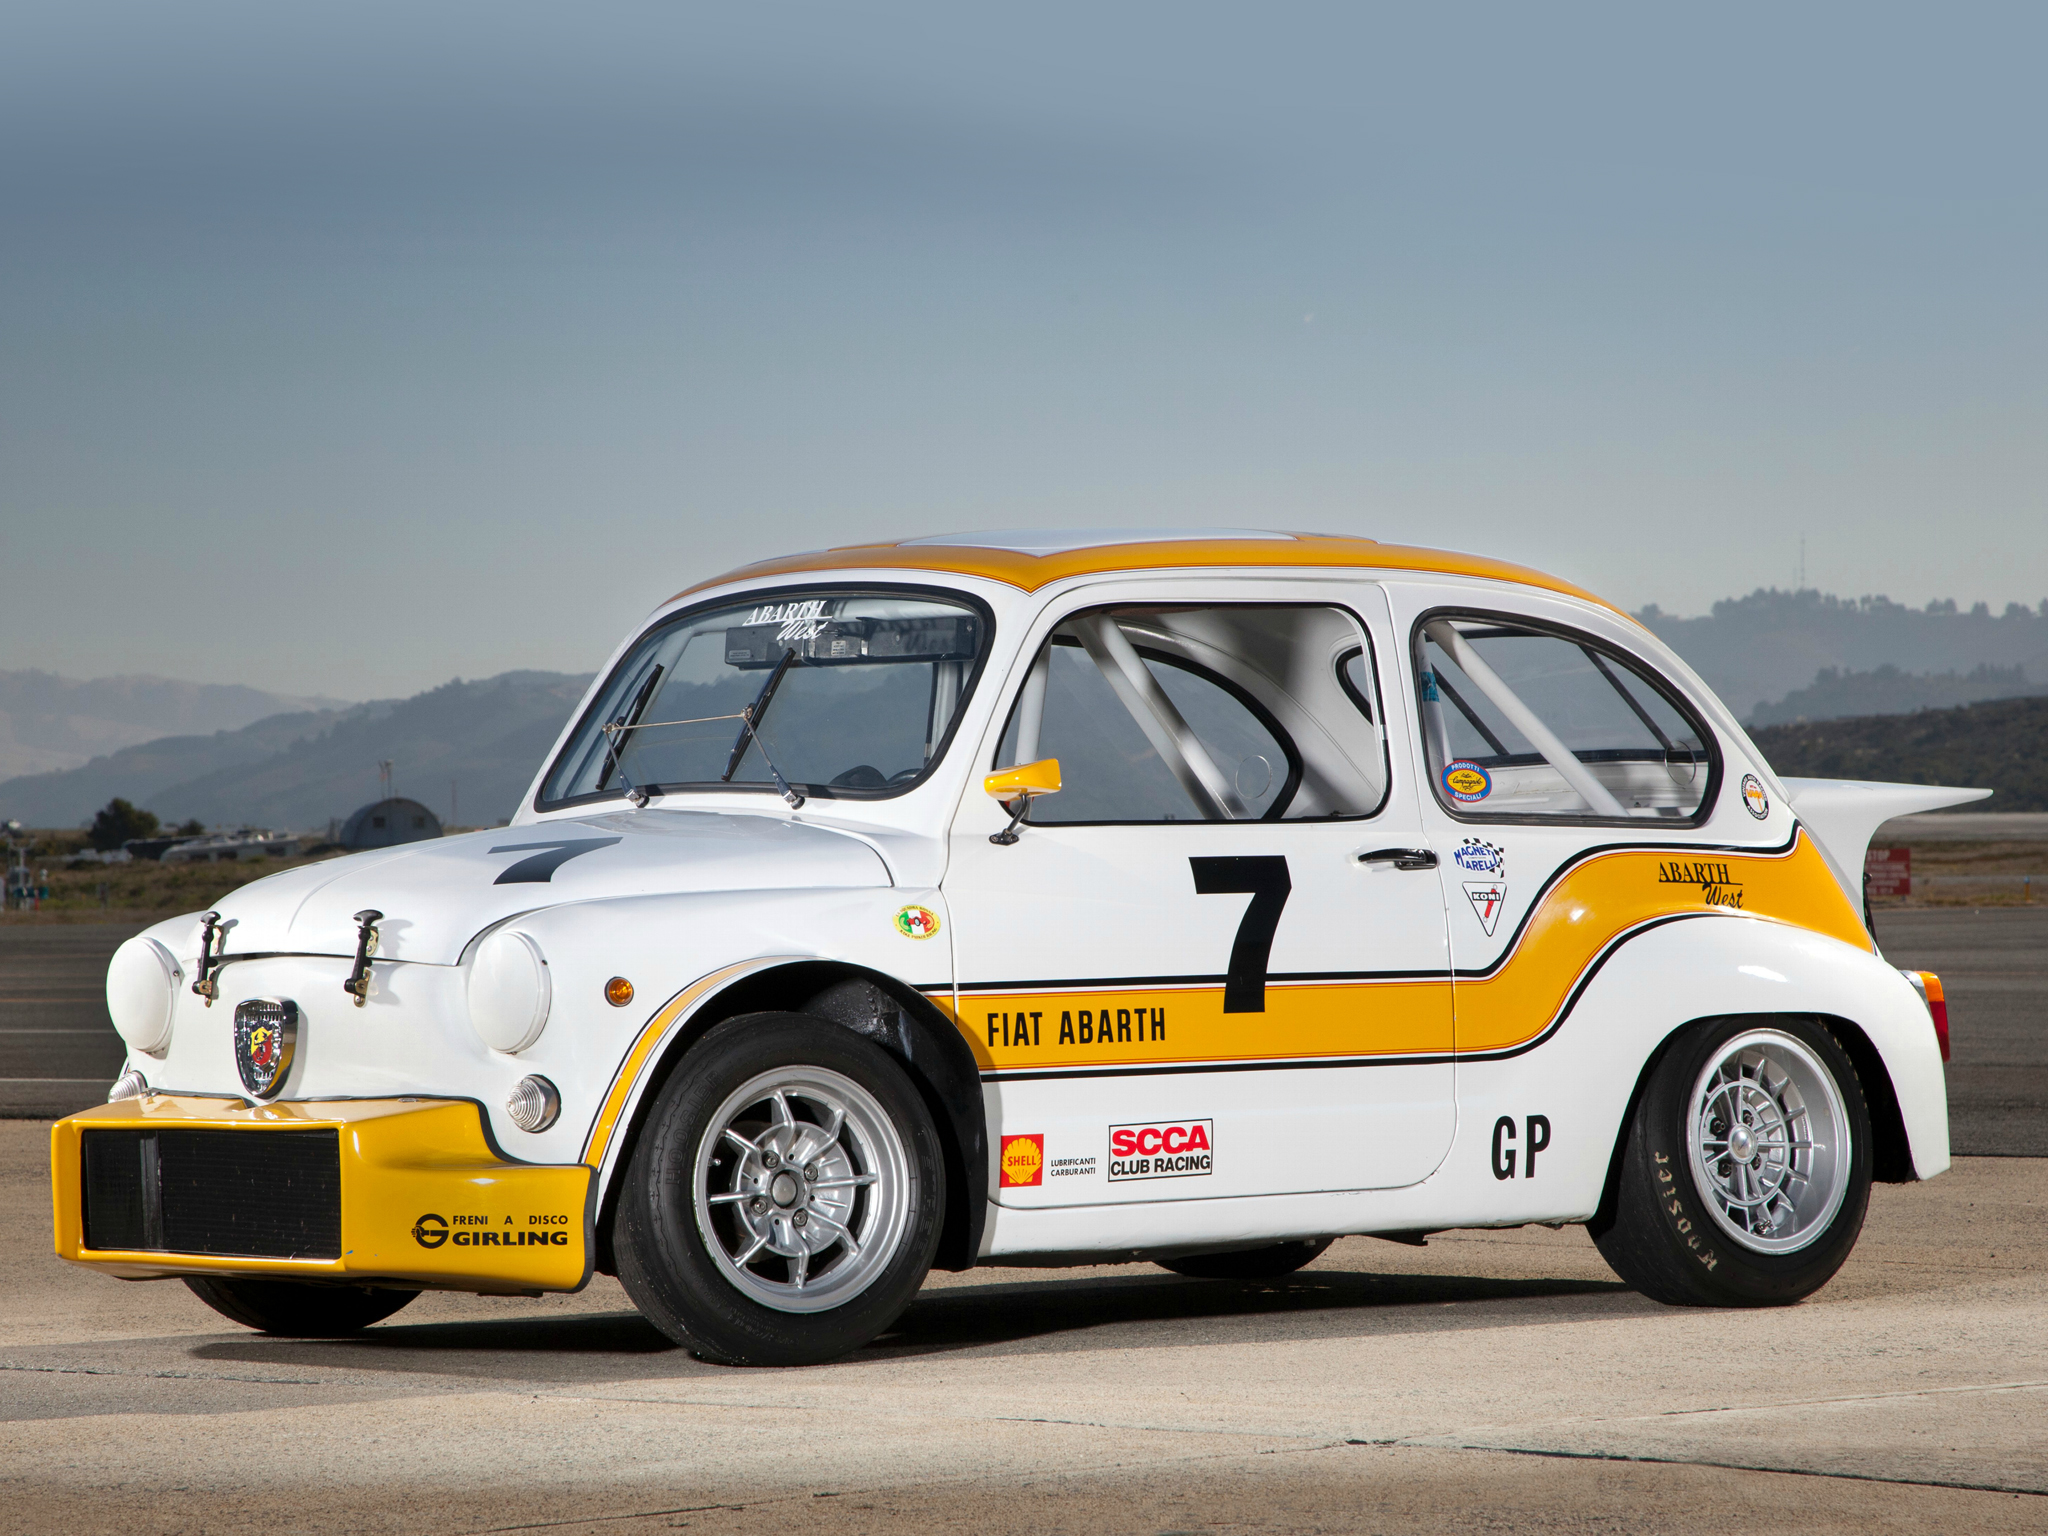 1970, Abarth, Fiat, 1000, Tcr, Group 2, Race, Racing, Gd Wallpaper